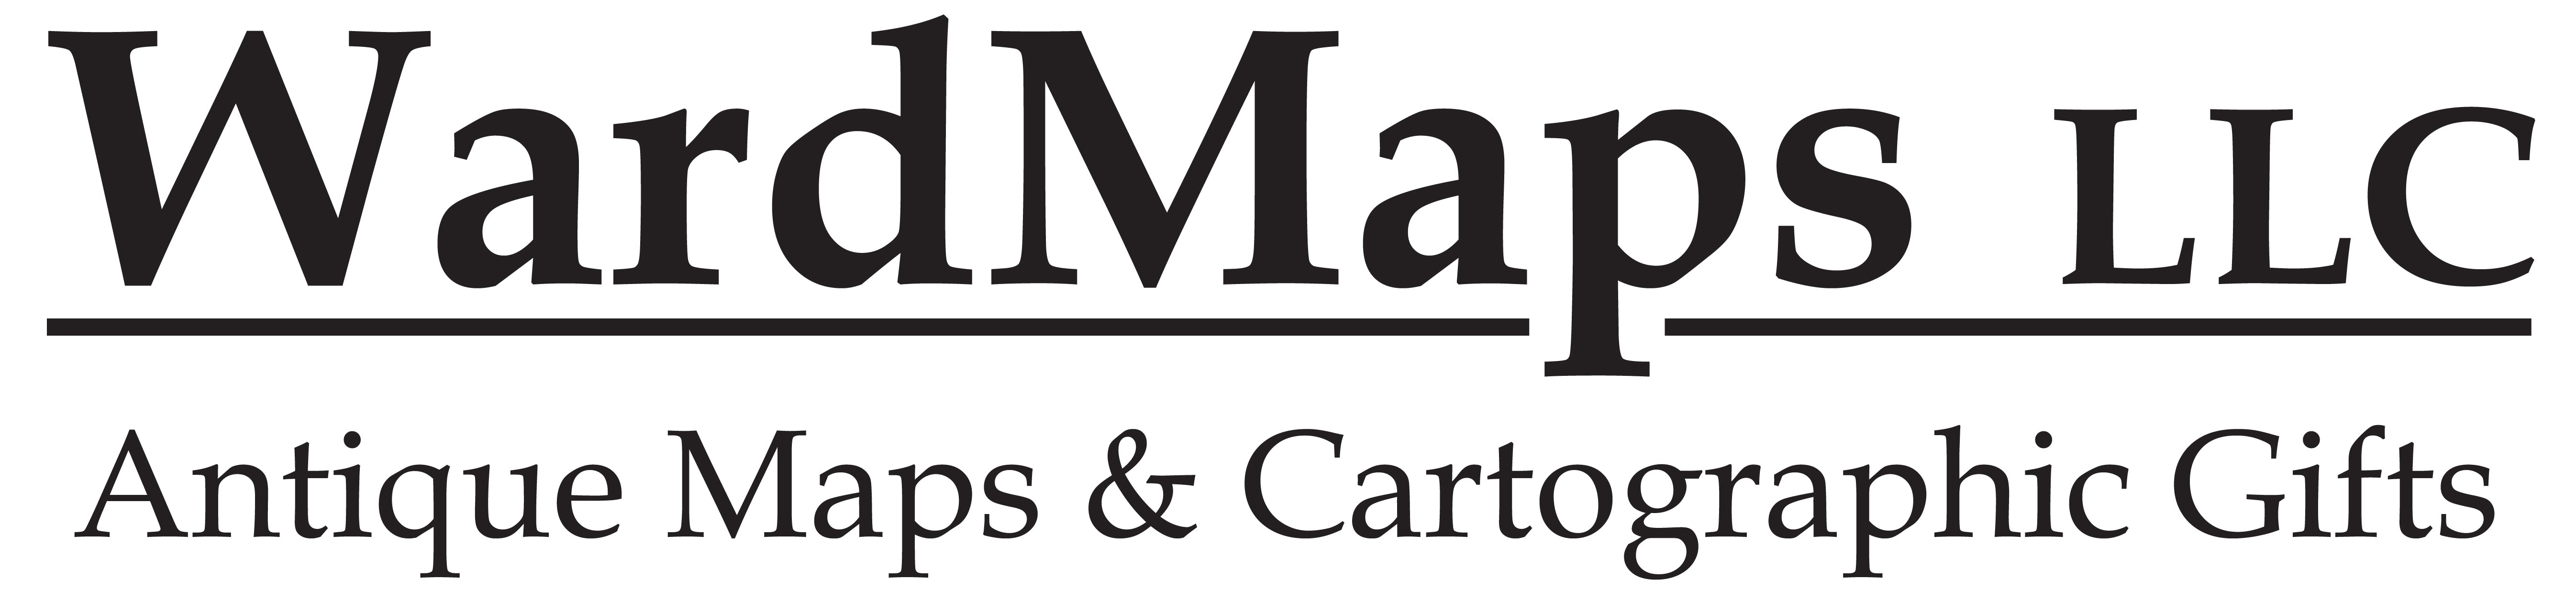 WardMaps LLC Antique Maps & Cartographic Gifts Logo. Link to Homepage.